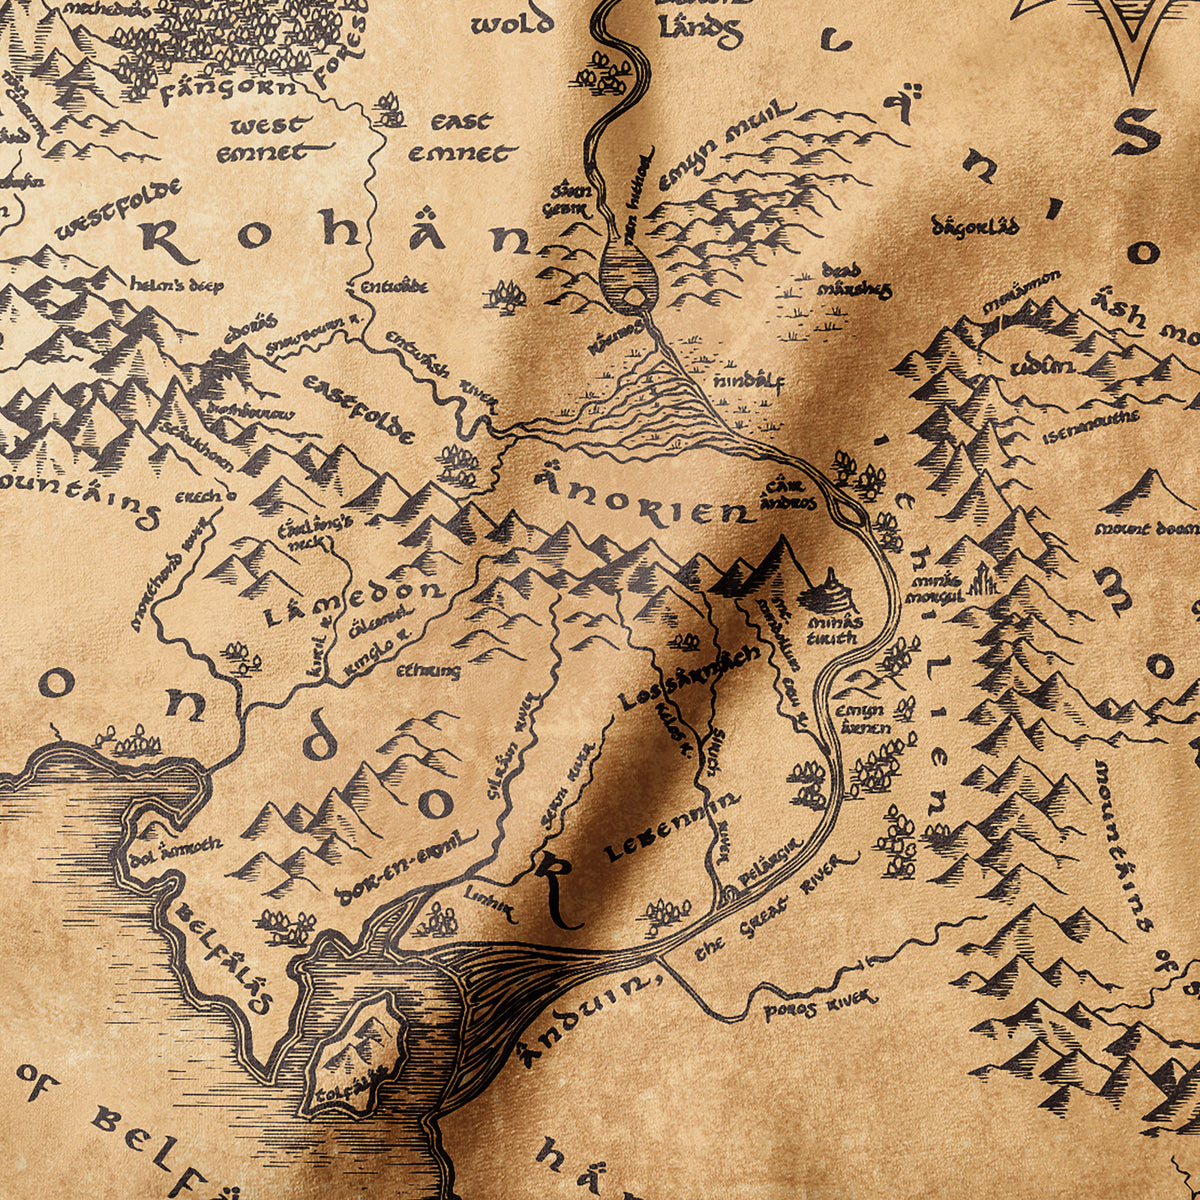 Middle-earth Maps